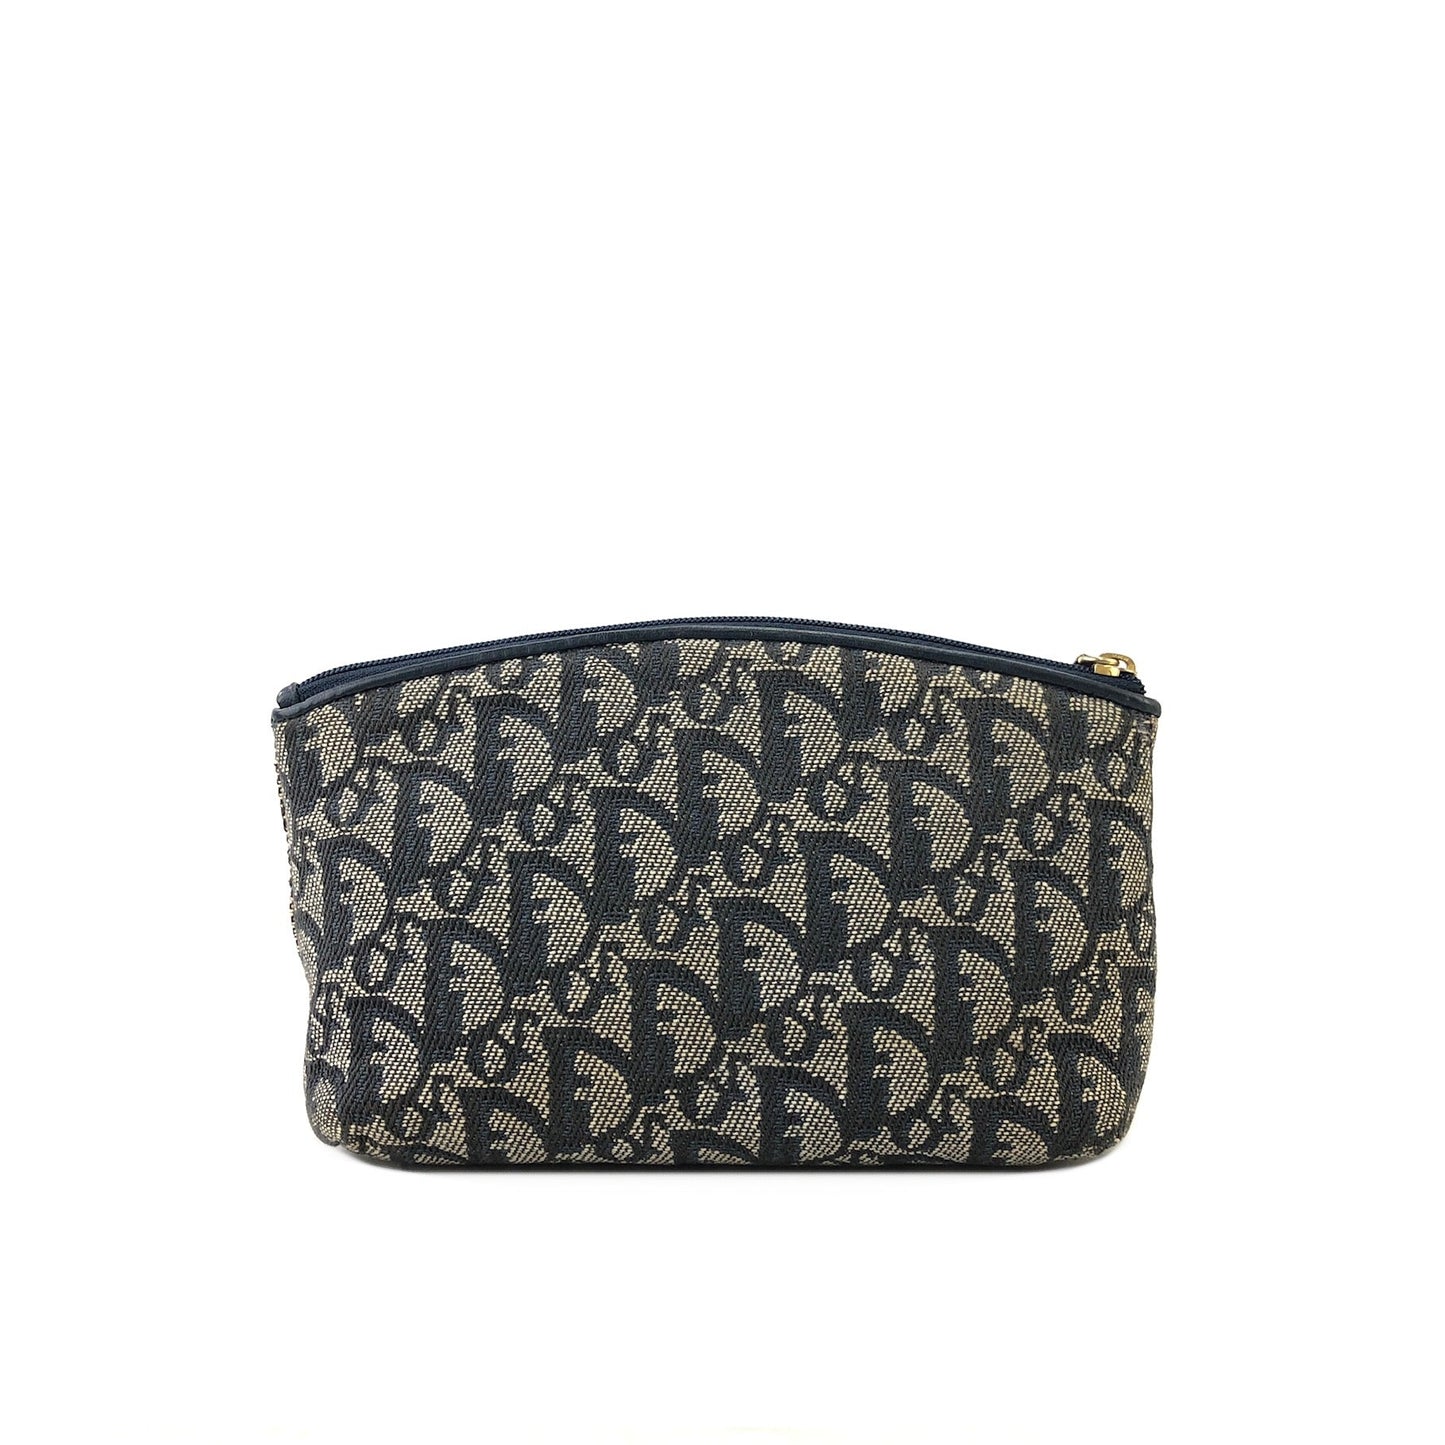 Christian Dior Trotter Jacquard Pouch Navy Vintage Old mz8vzi